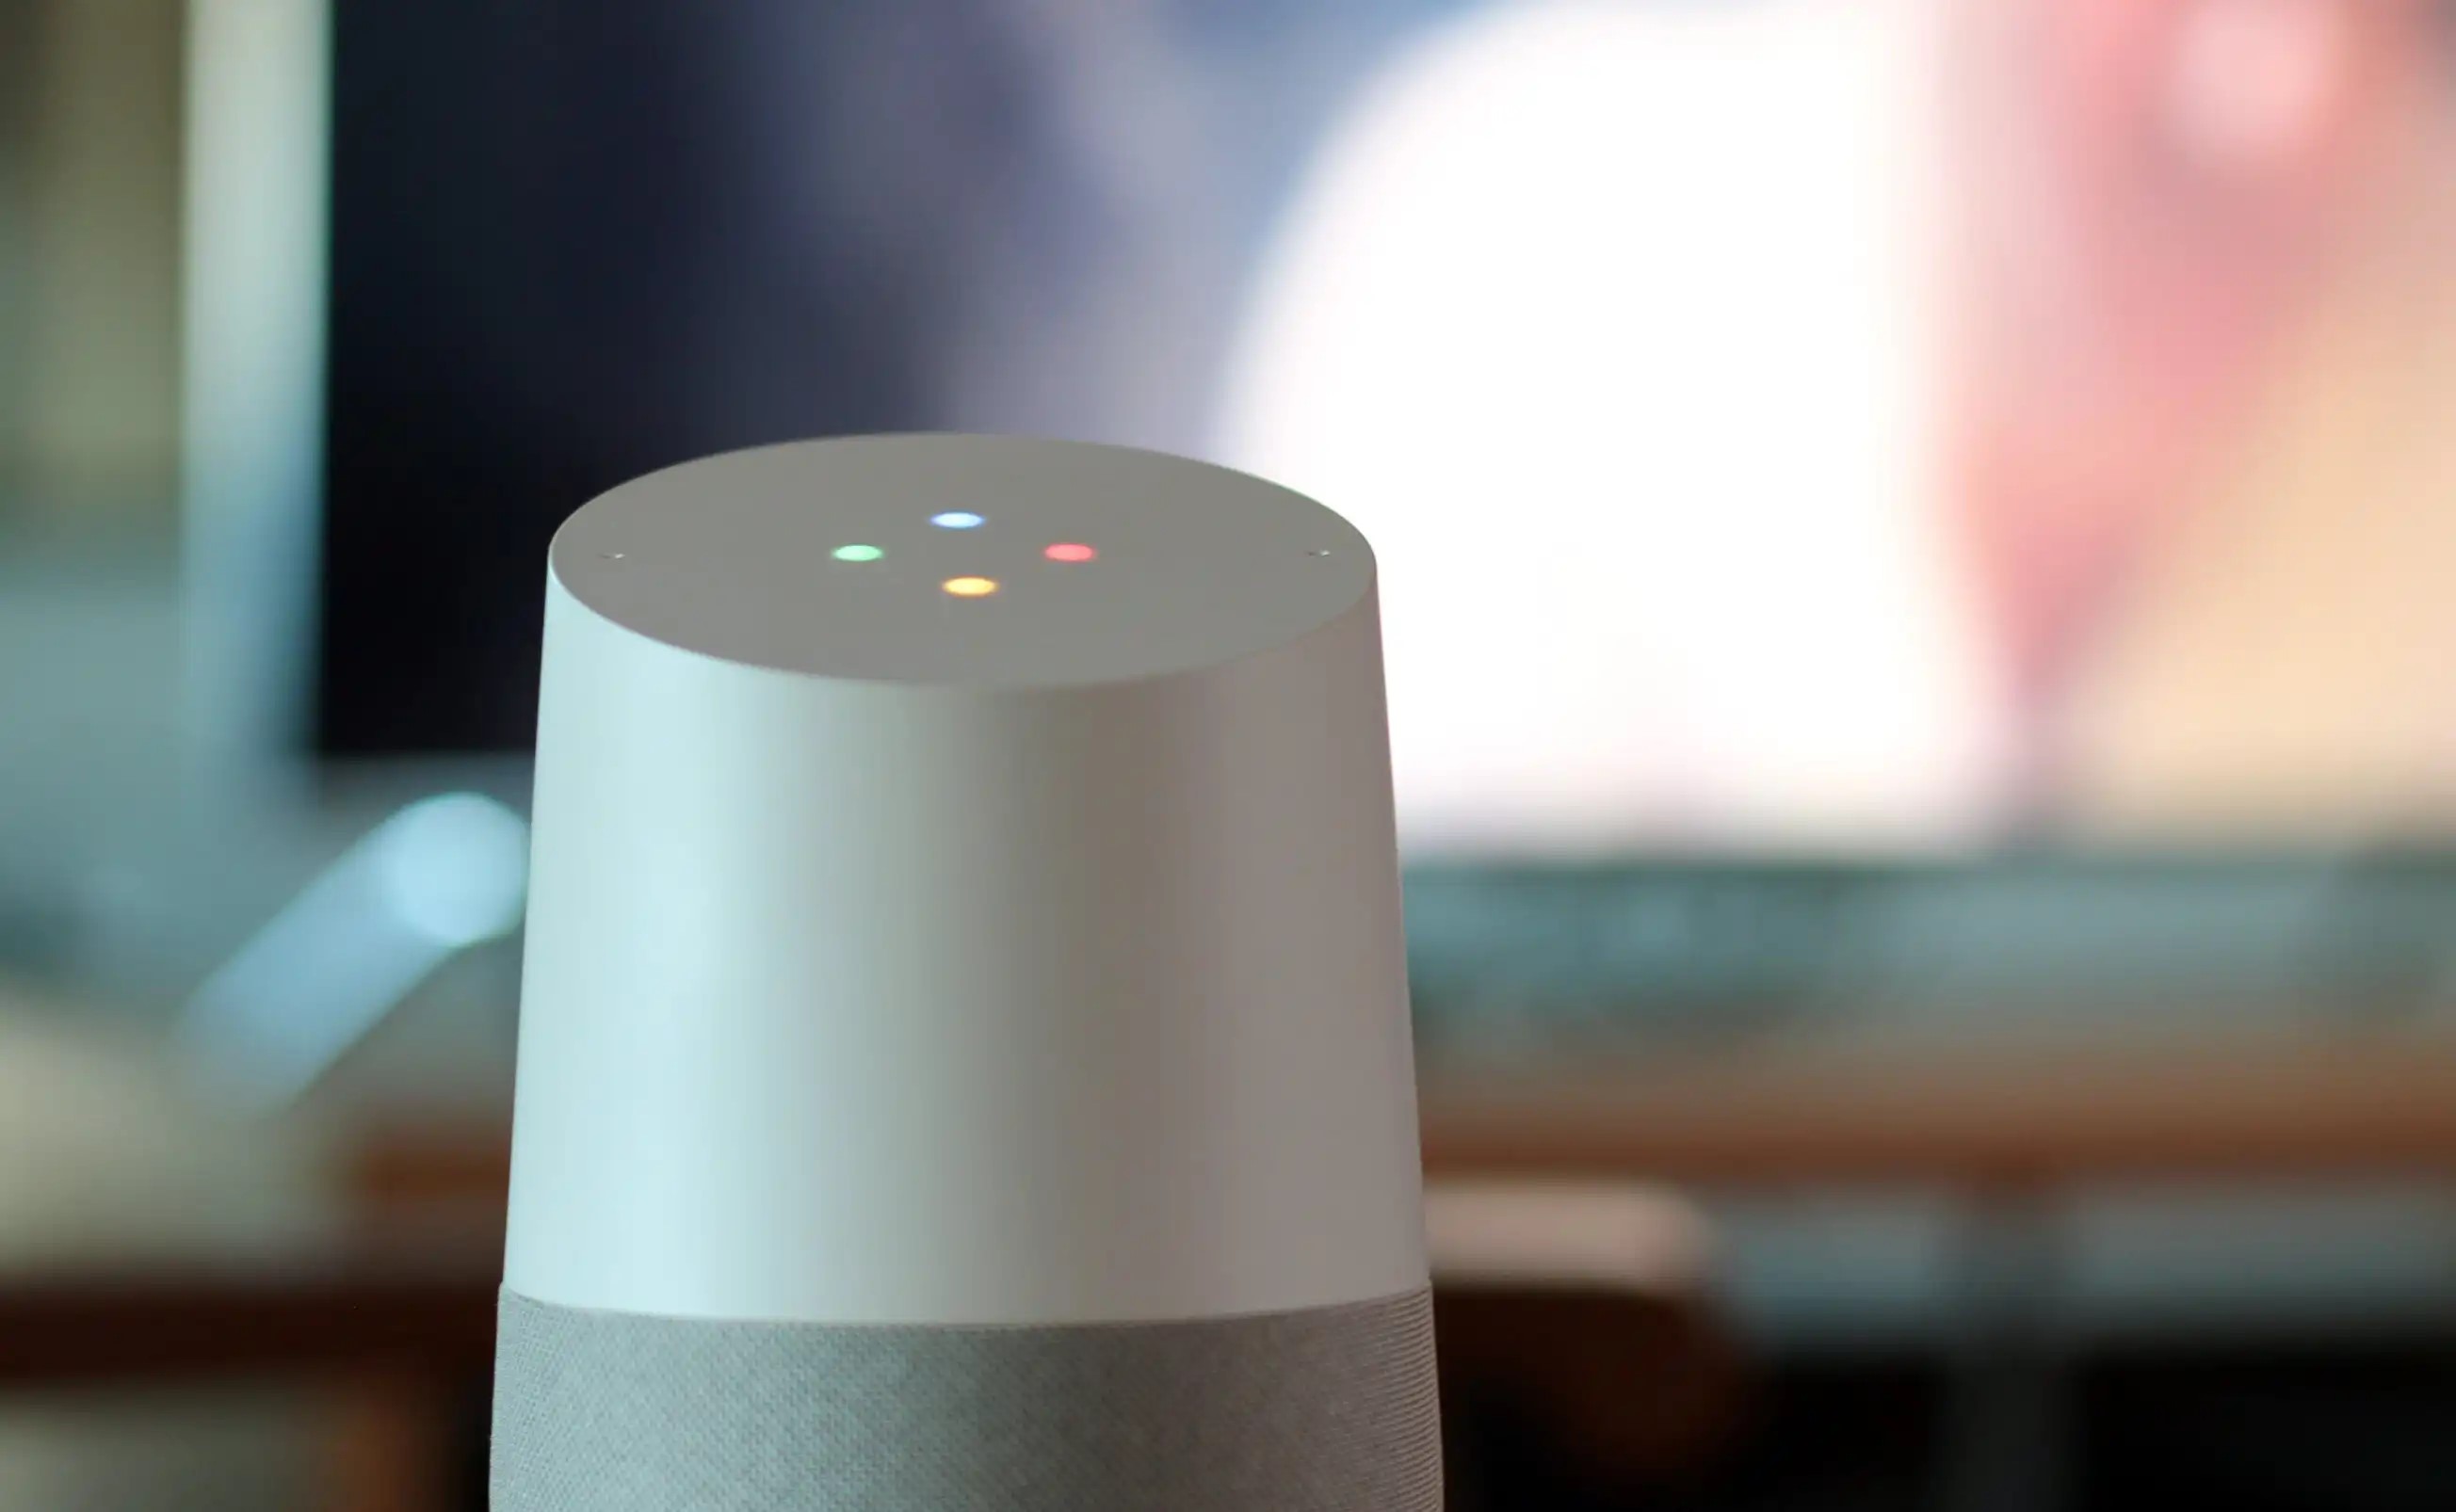 How To Use Google Home To Turn On TV